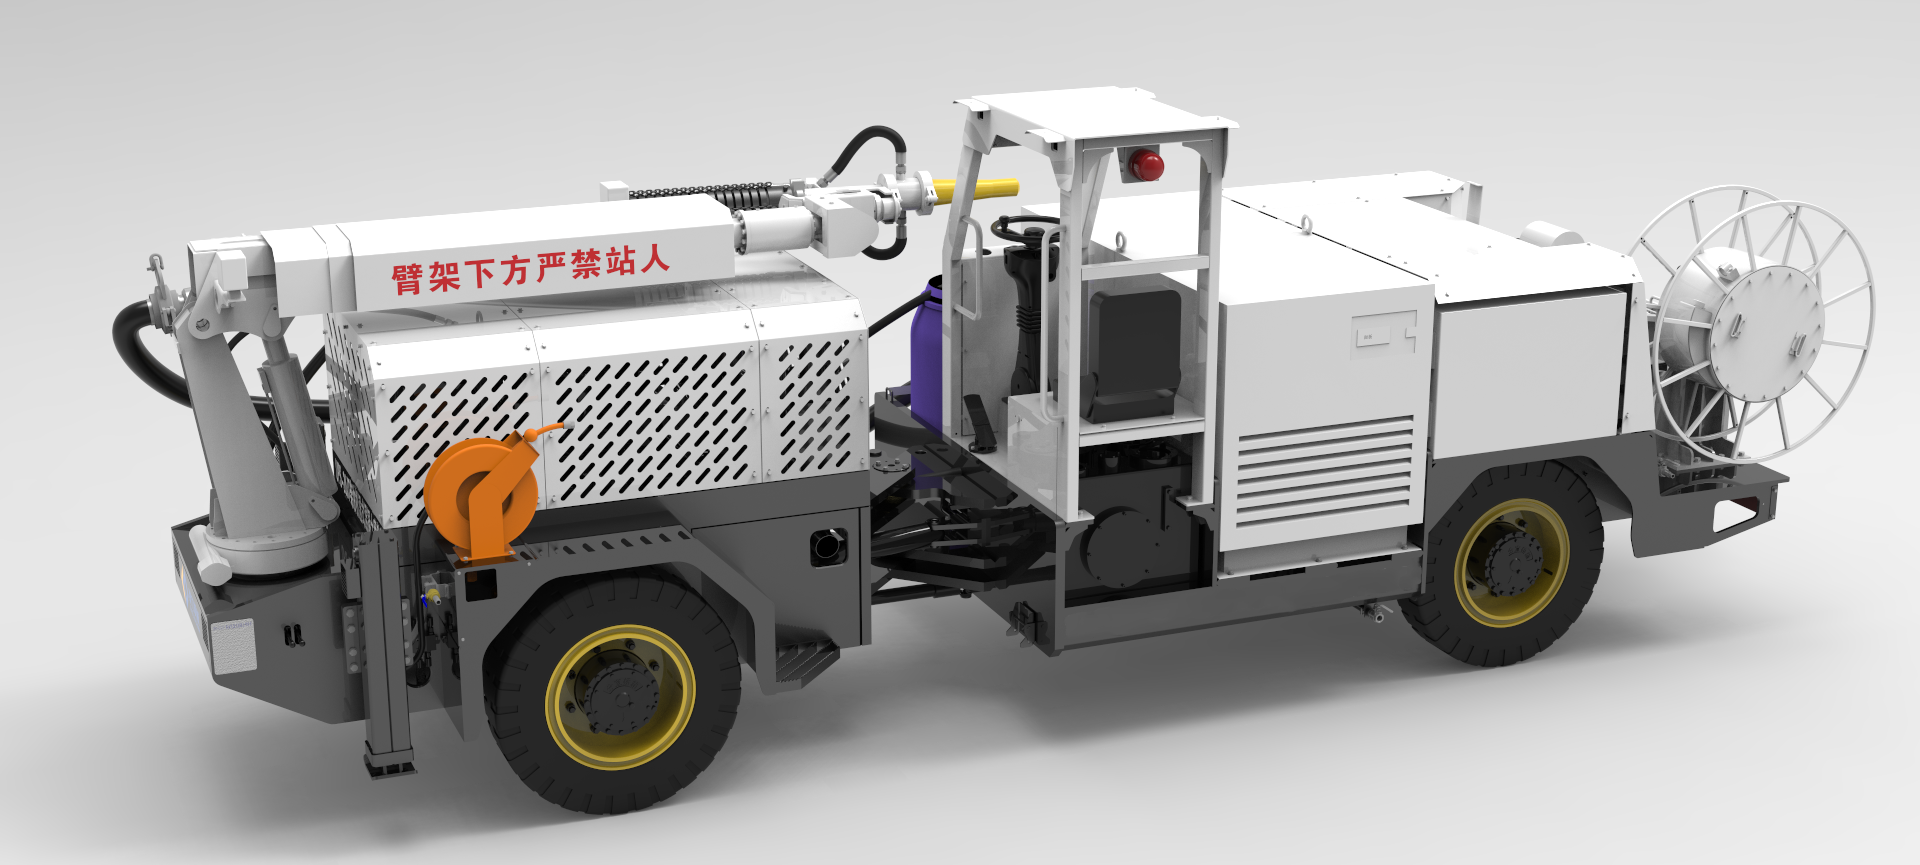 wet-mix-concrete-sprayer-GH1809G-K2-by-HOT-Mining-1 (4).png